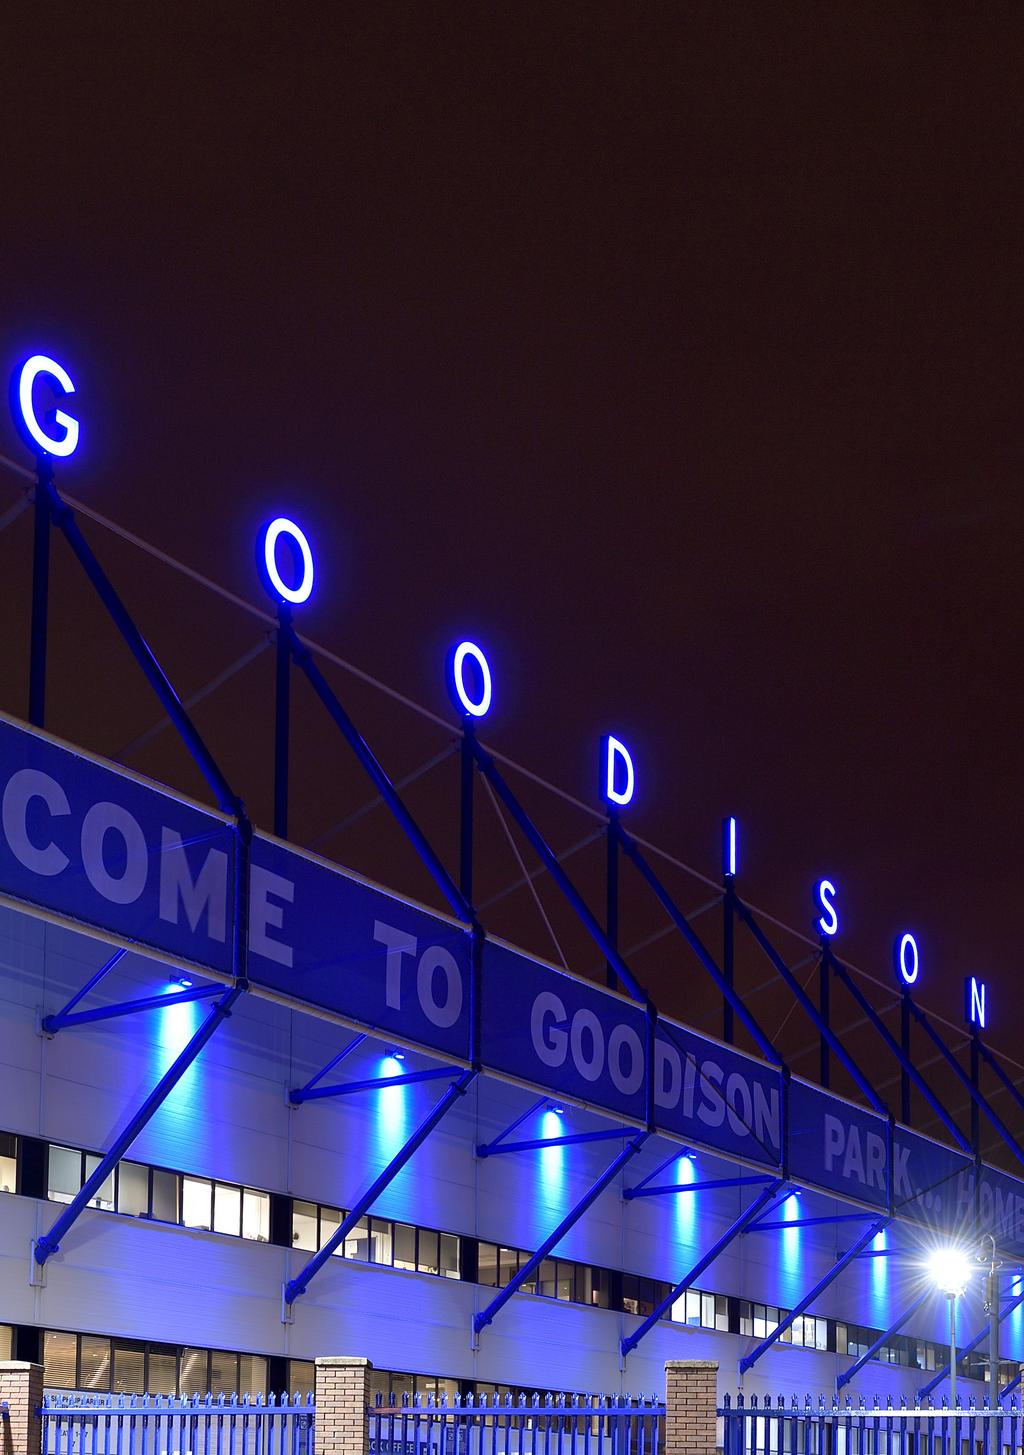 WELCOME TO We hope you find our Goodison Park matchday information helpful, it has been designed to help you get the most out of your visit to the Stadium.